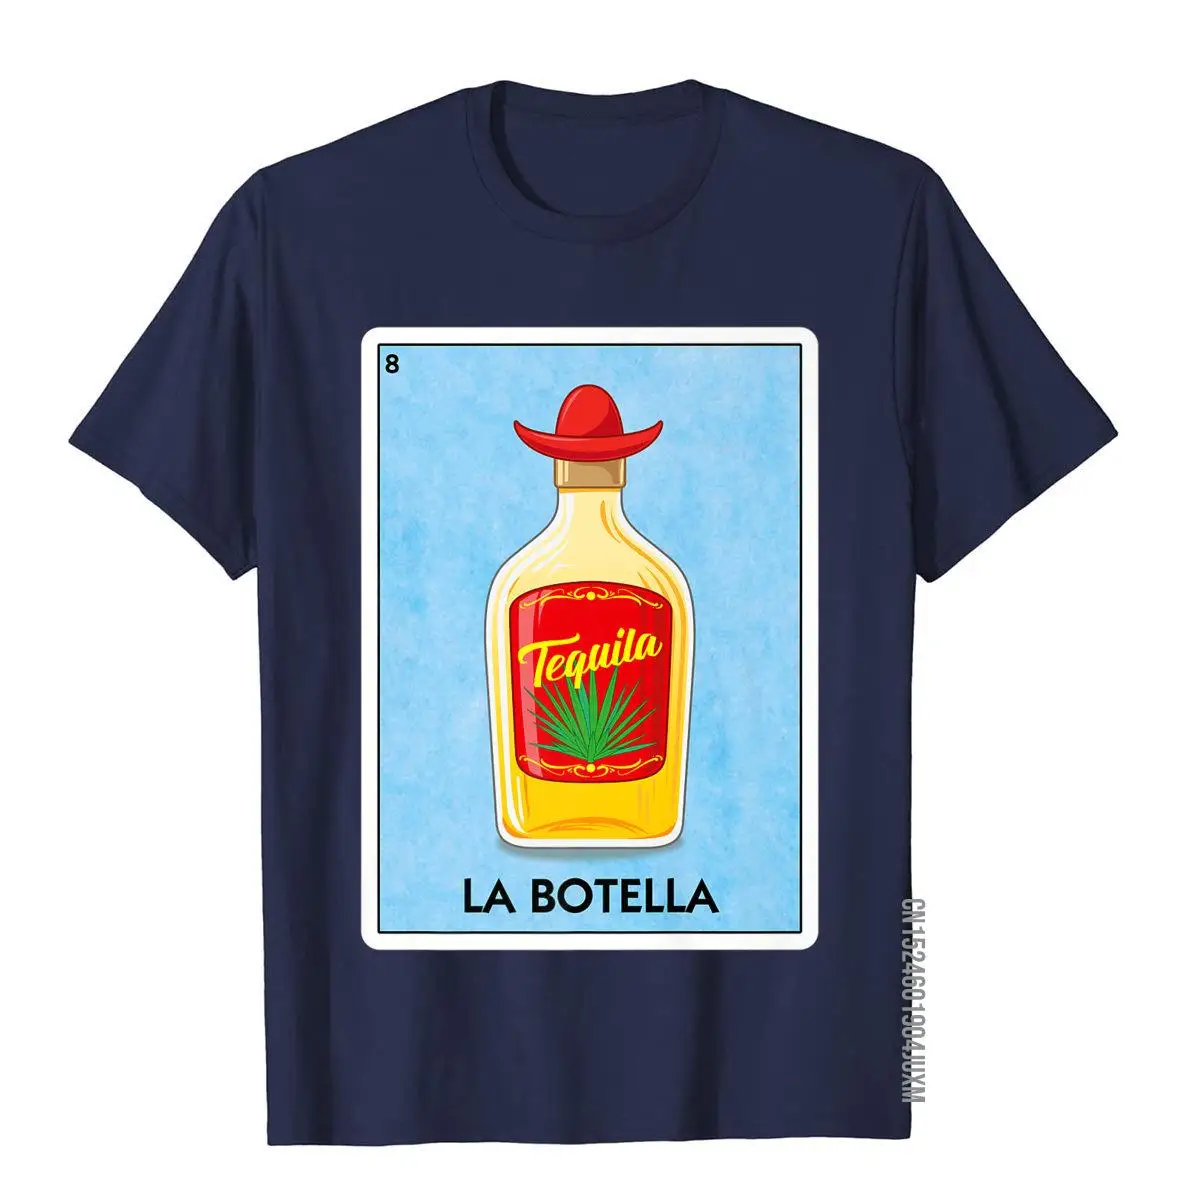 La Botella Mexican Card Game Tequila Bottle Sombrero Premium T-Shirt__97A690navy